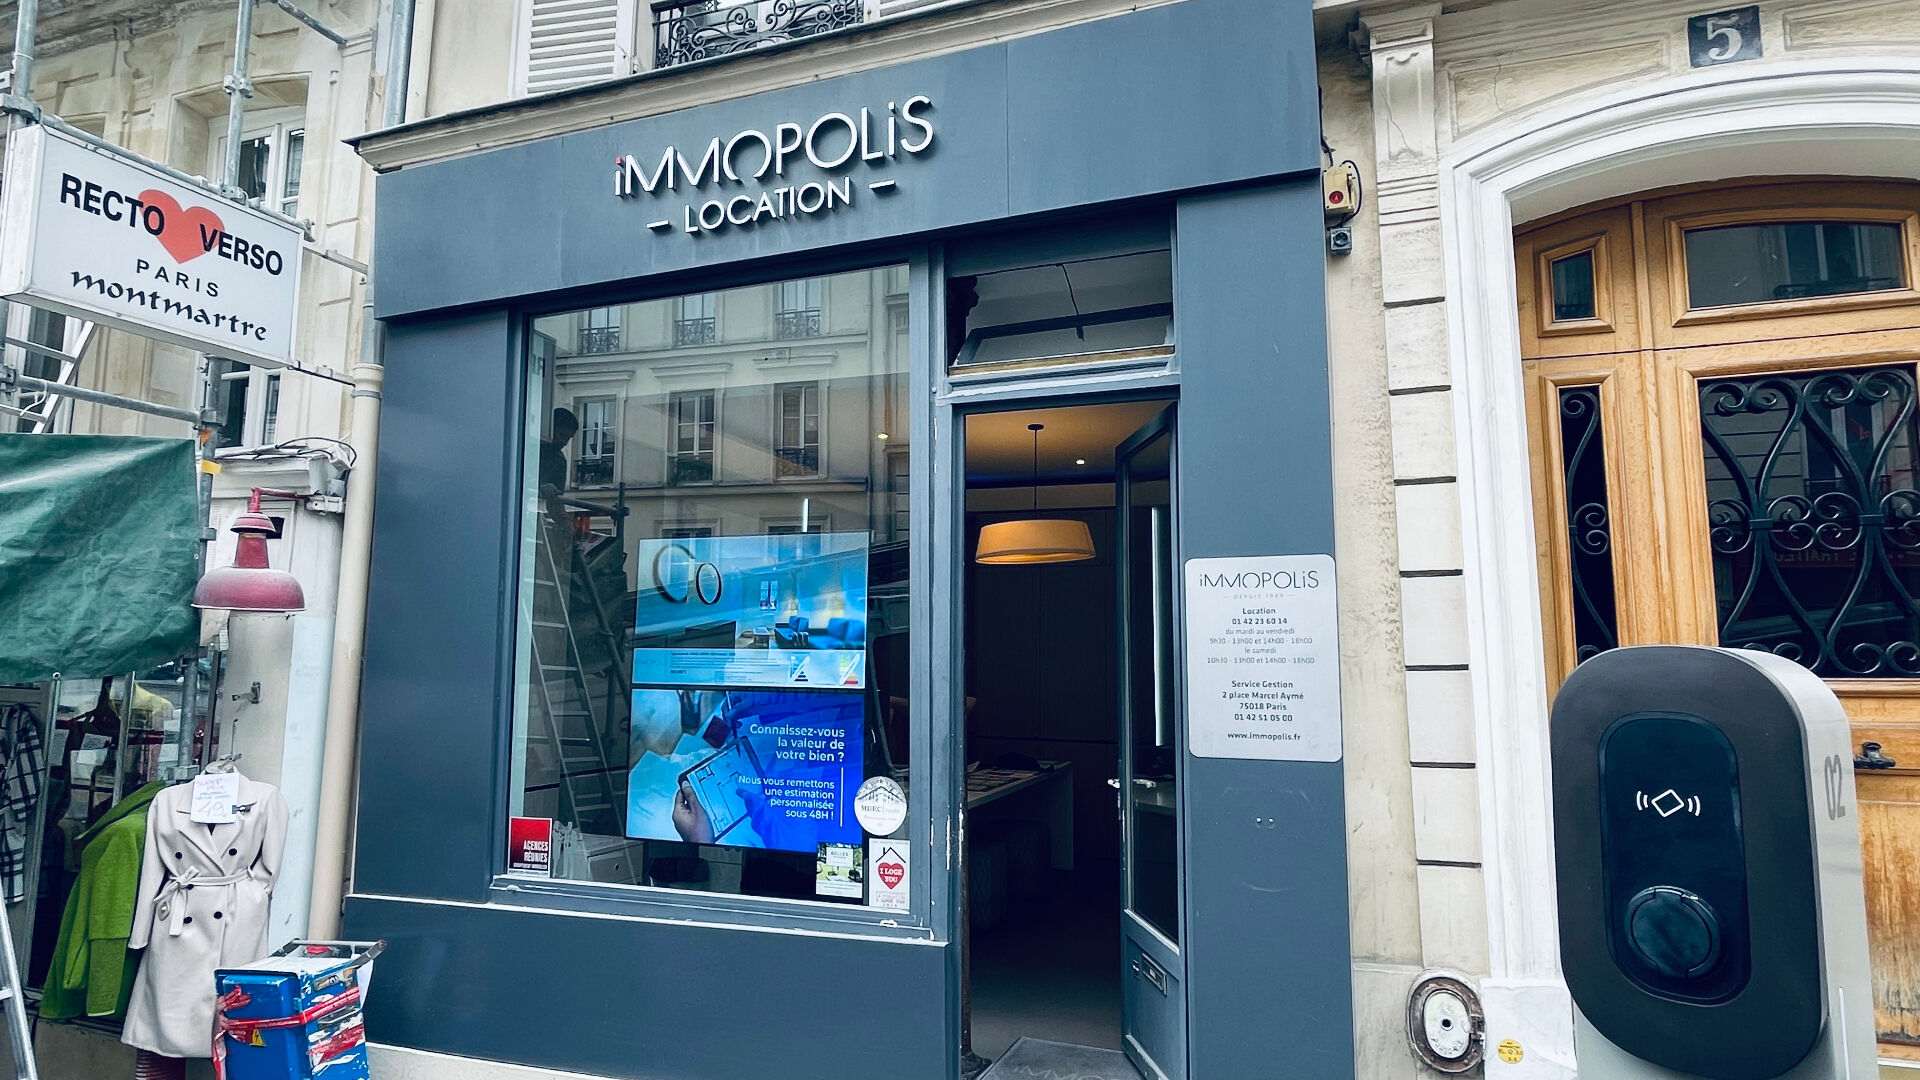 Very good location sought in abbesses, rue Ravignan: Beautiful commercial premises in perfect condition! 1